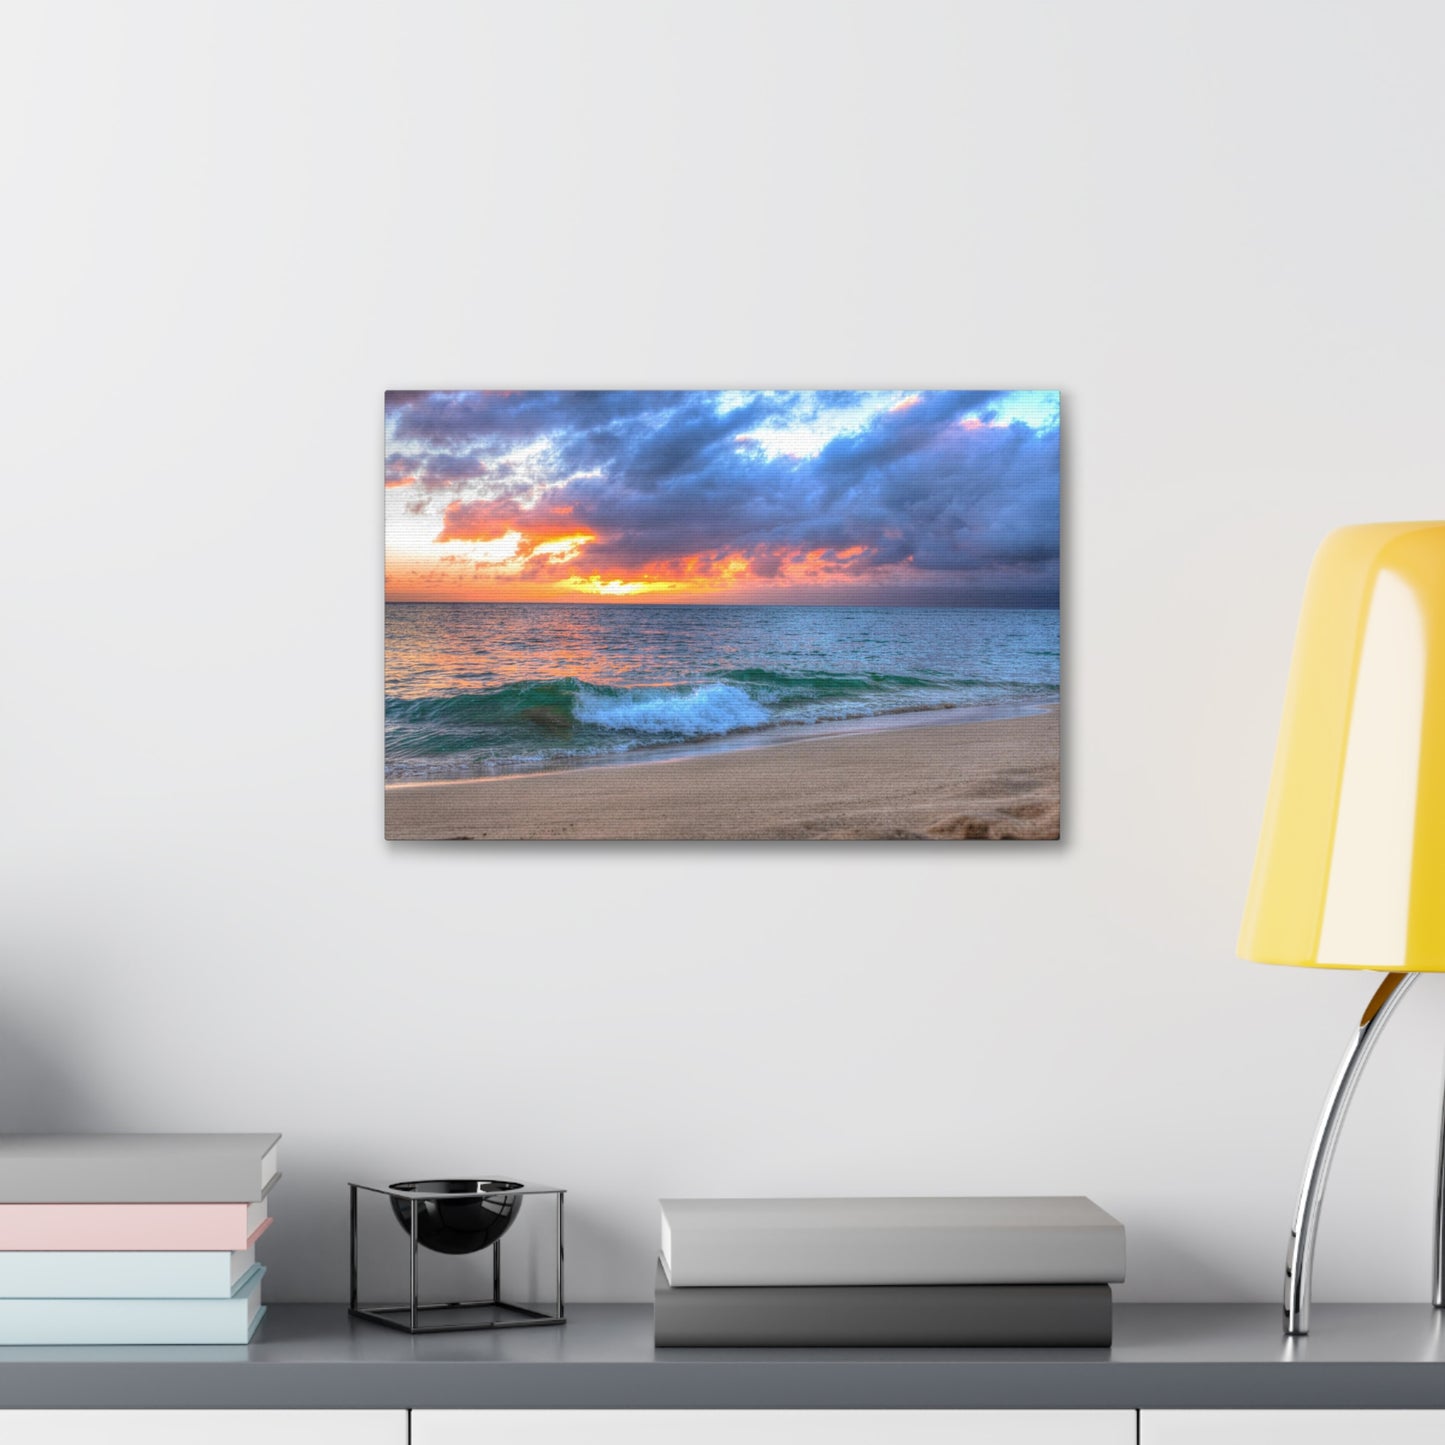 Canvas Print Of A Wave At Sunset In Hawaii For Wall Art